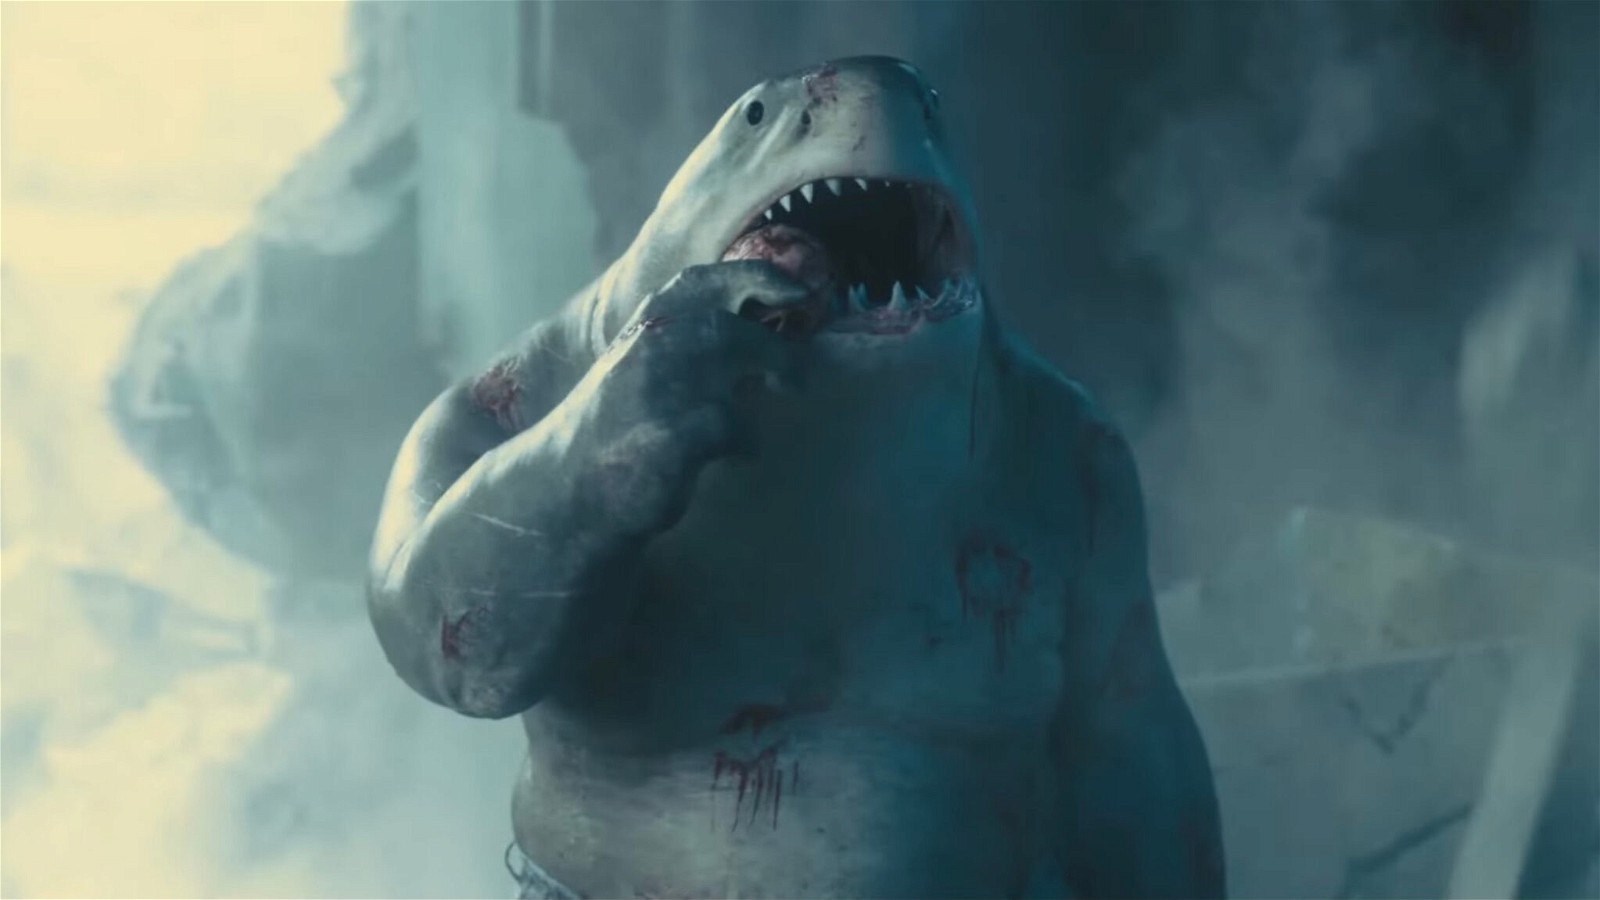 Sylvester Stallne voices King Shark in The Suicide Squad